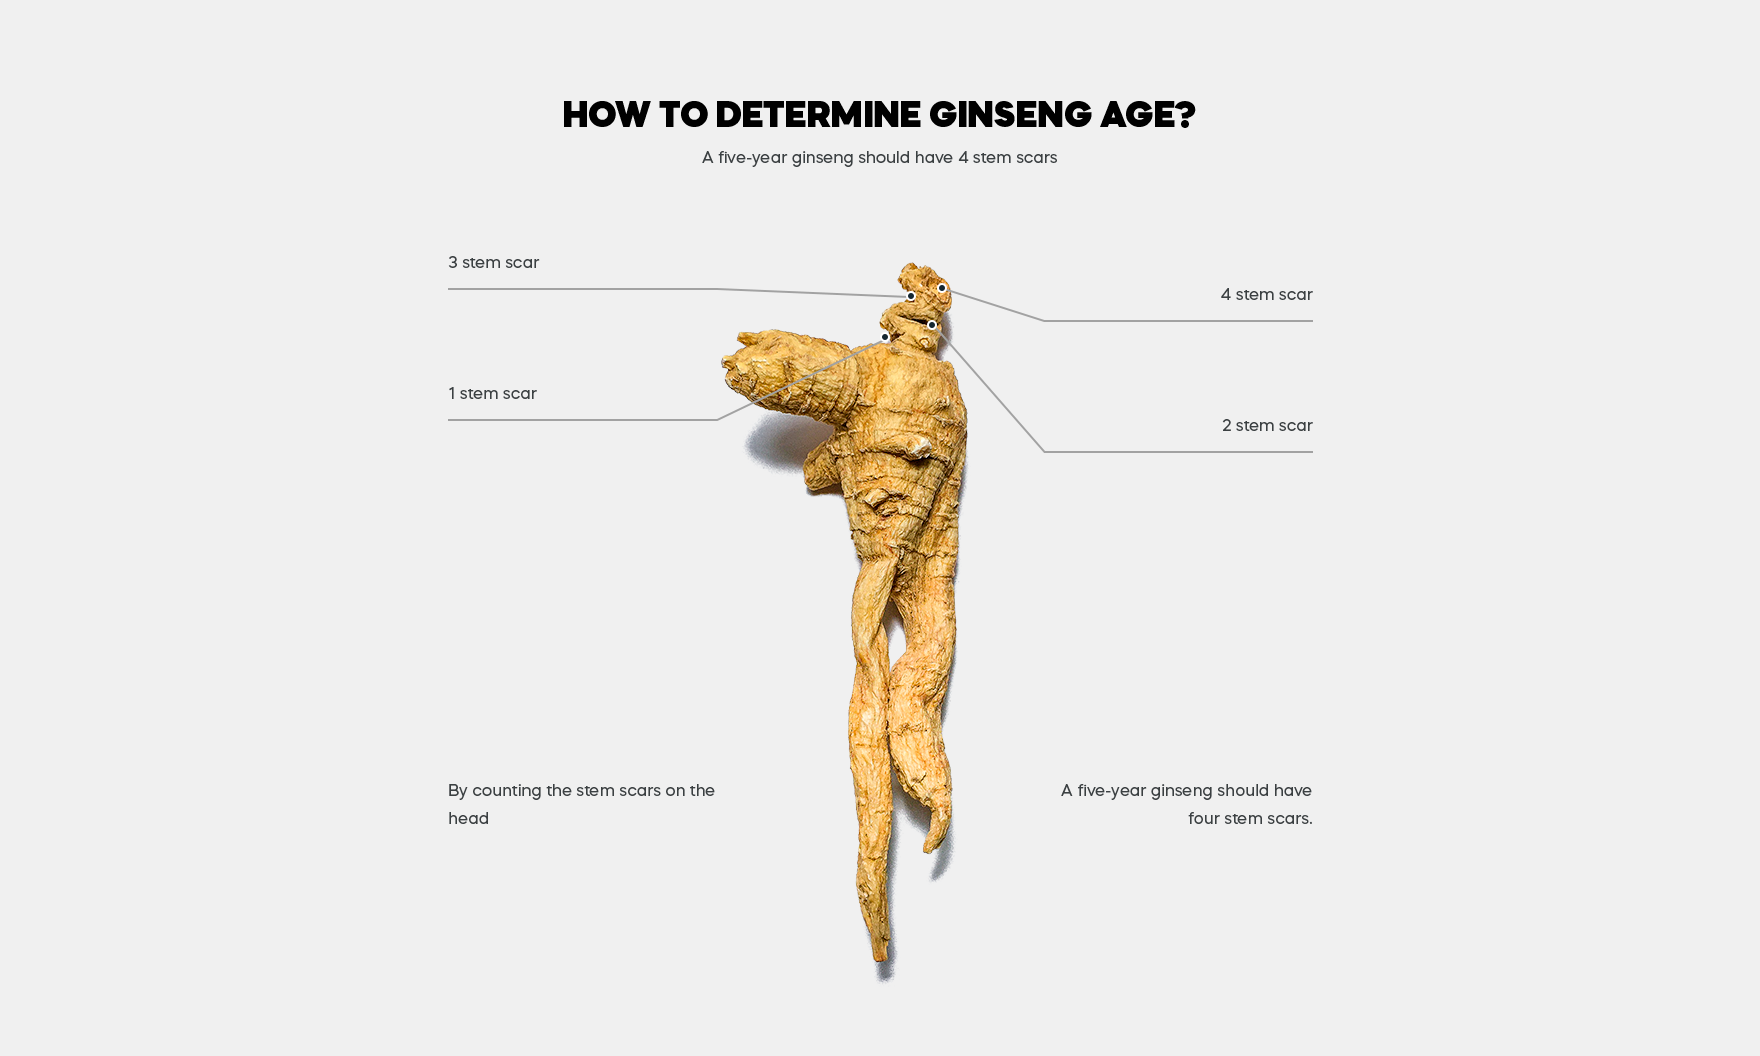 How to tell ginseng age